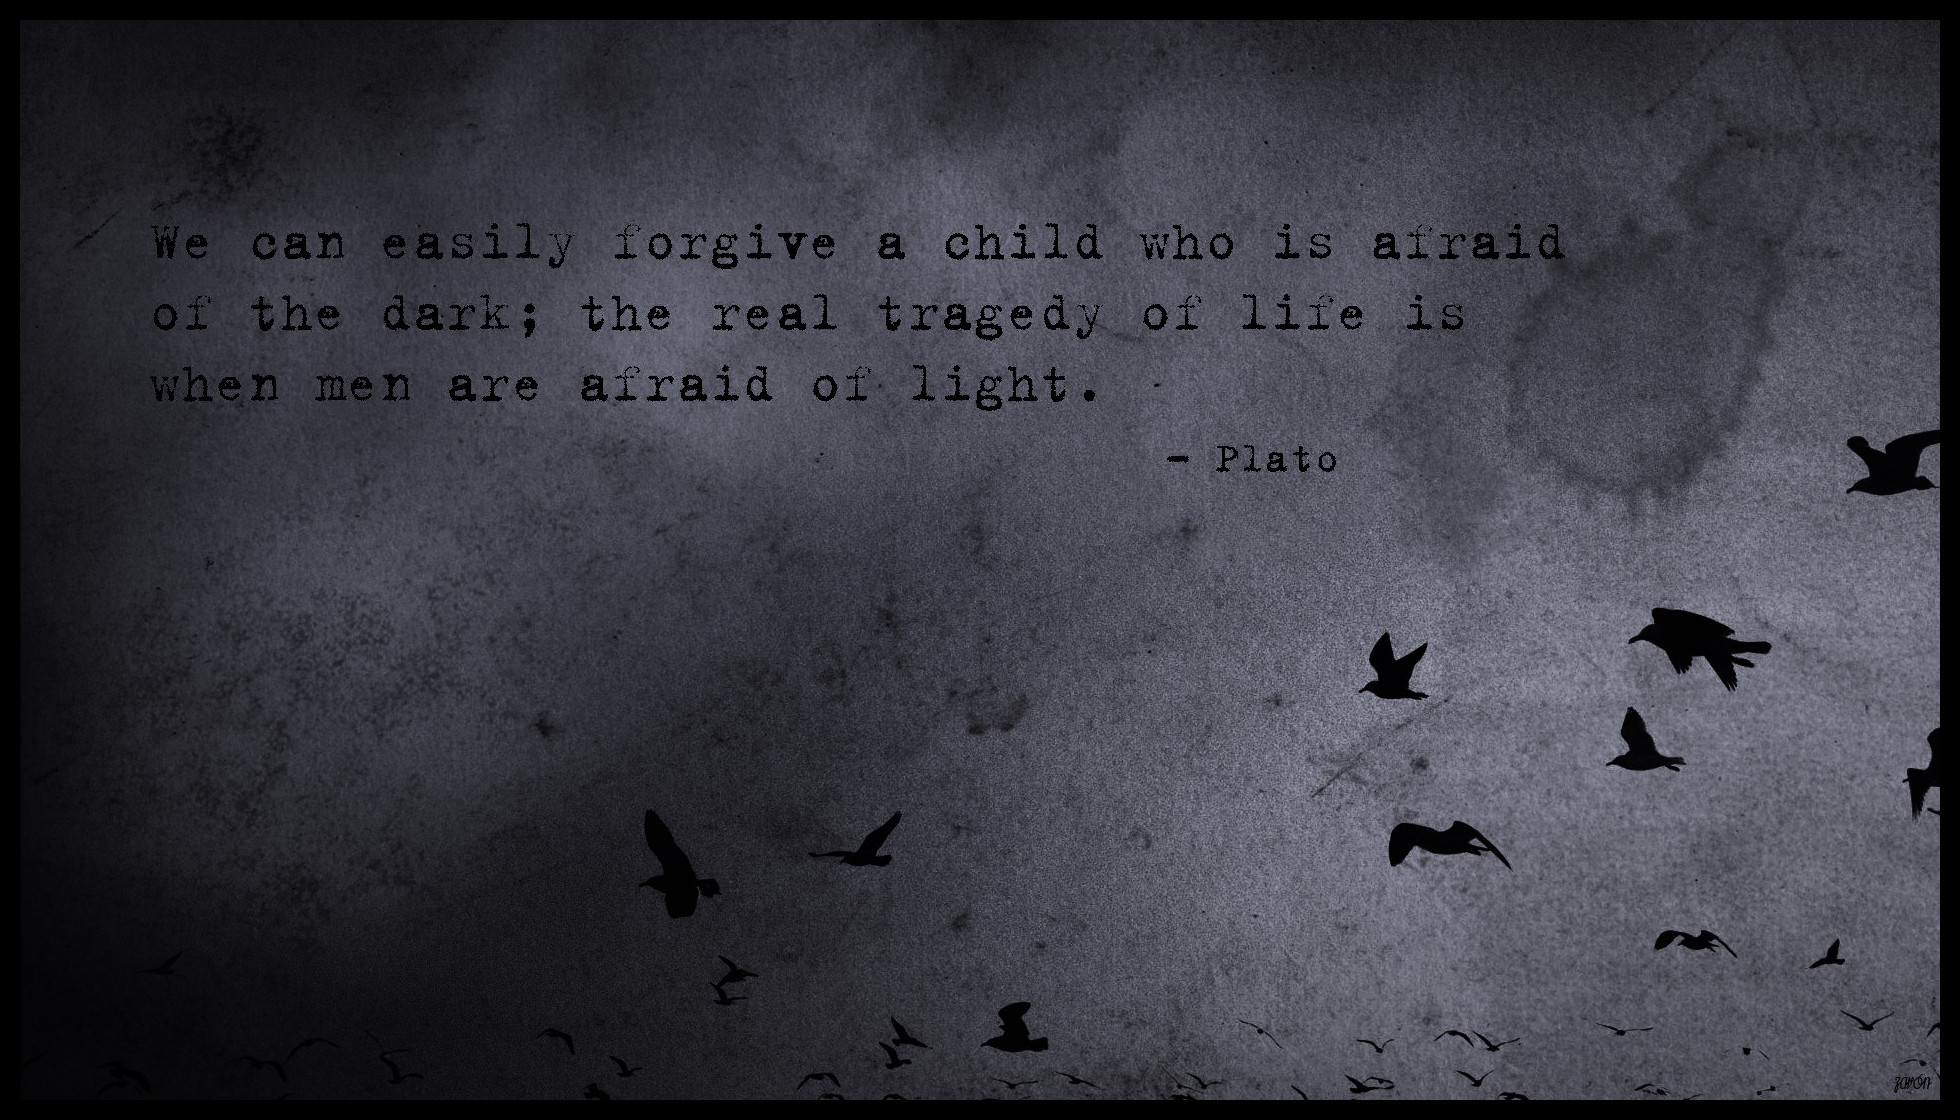 Plato Quote Tragedy Of Life - Ghosts Nine Inch Nails - HD Wallpaper 